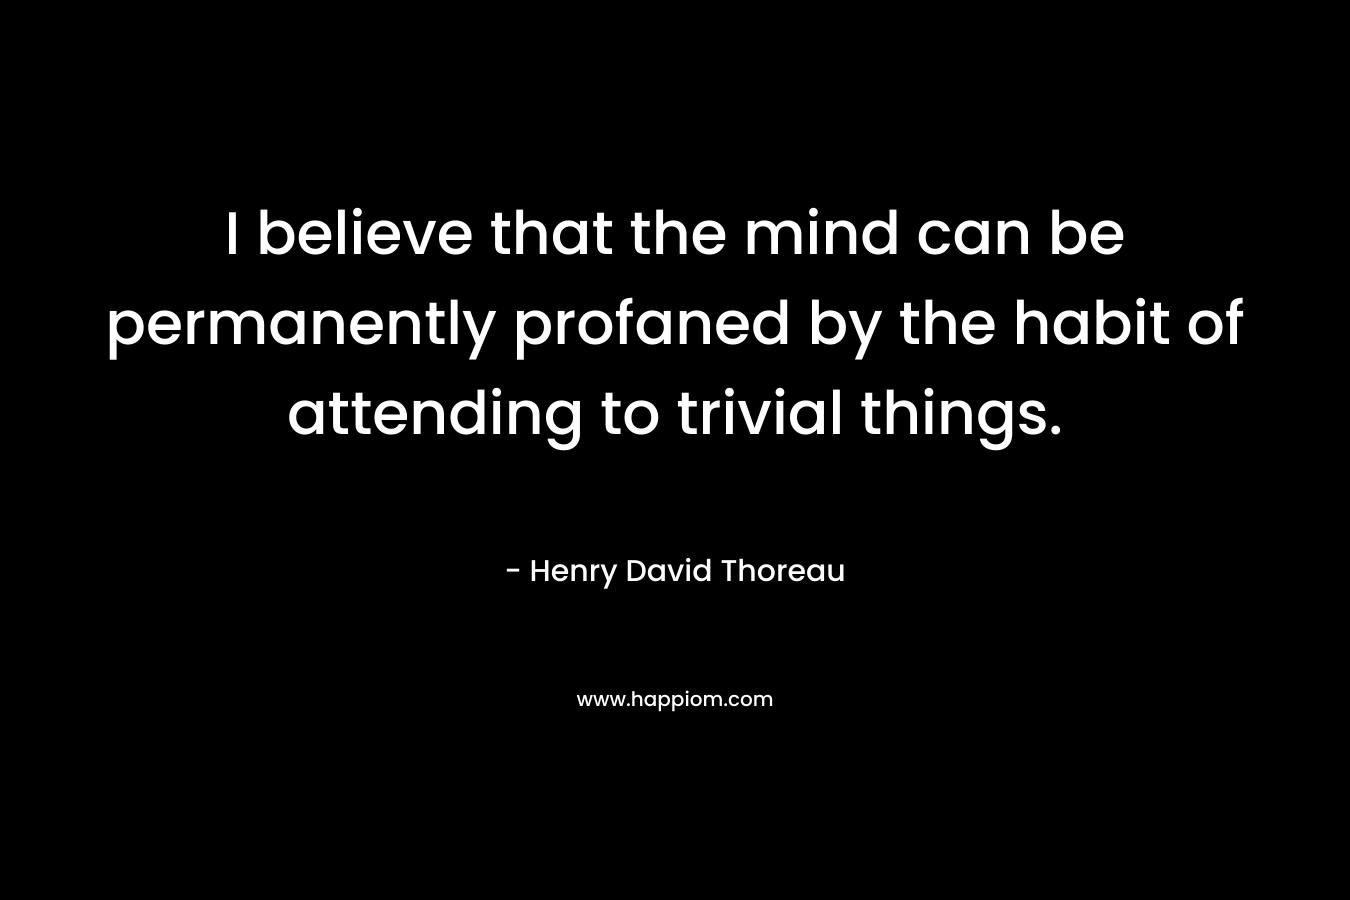 I believe that the mind can be permanently profaned by the habit of attending to trivial things.